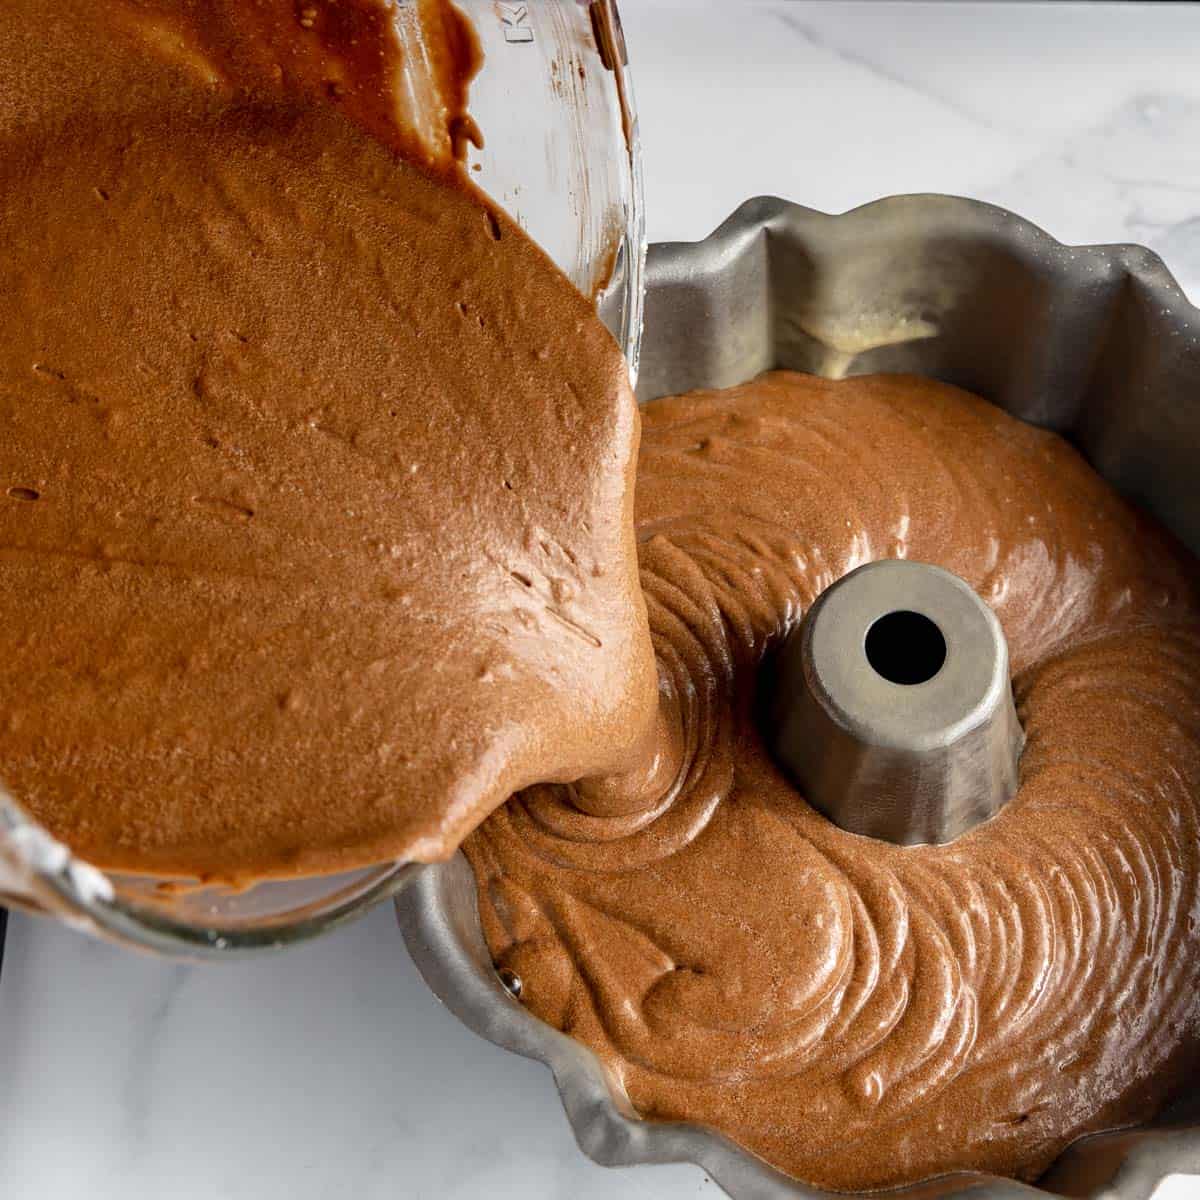 Chocolate cake batter poured into a bundt pan